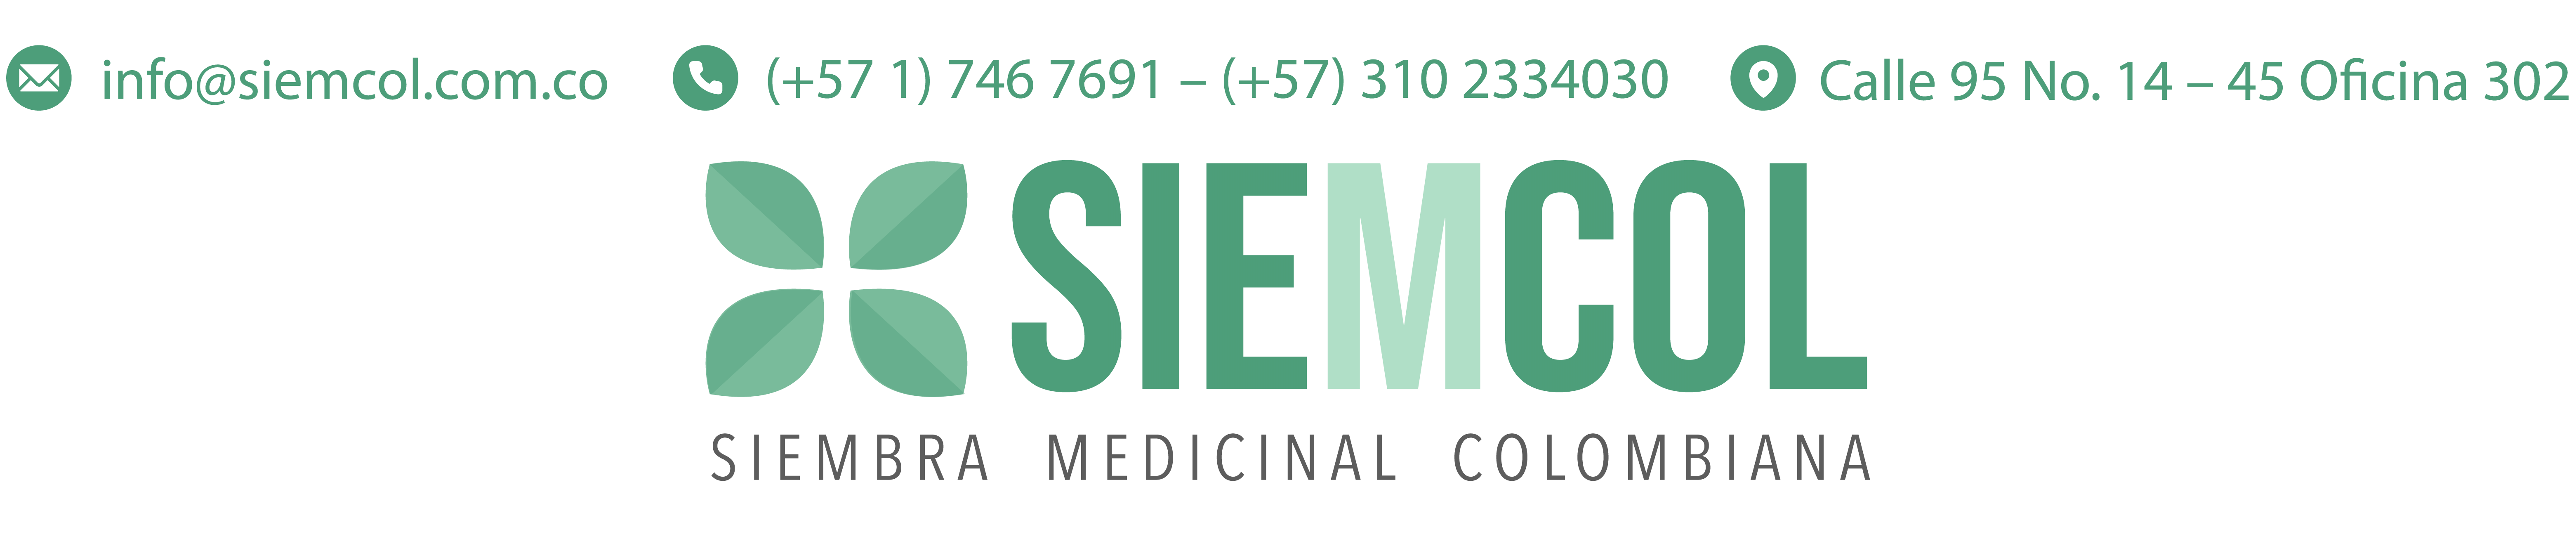 Siemcol – Siembra Medicinal Colombiana